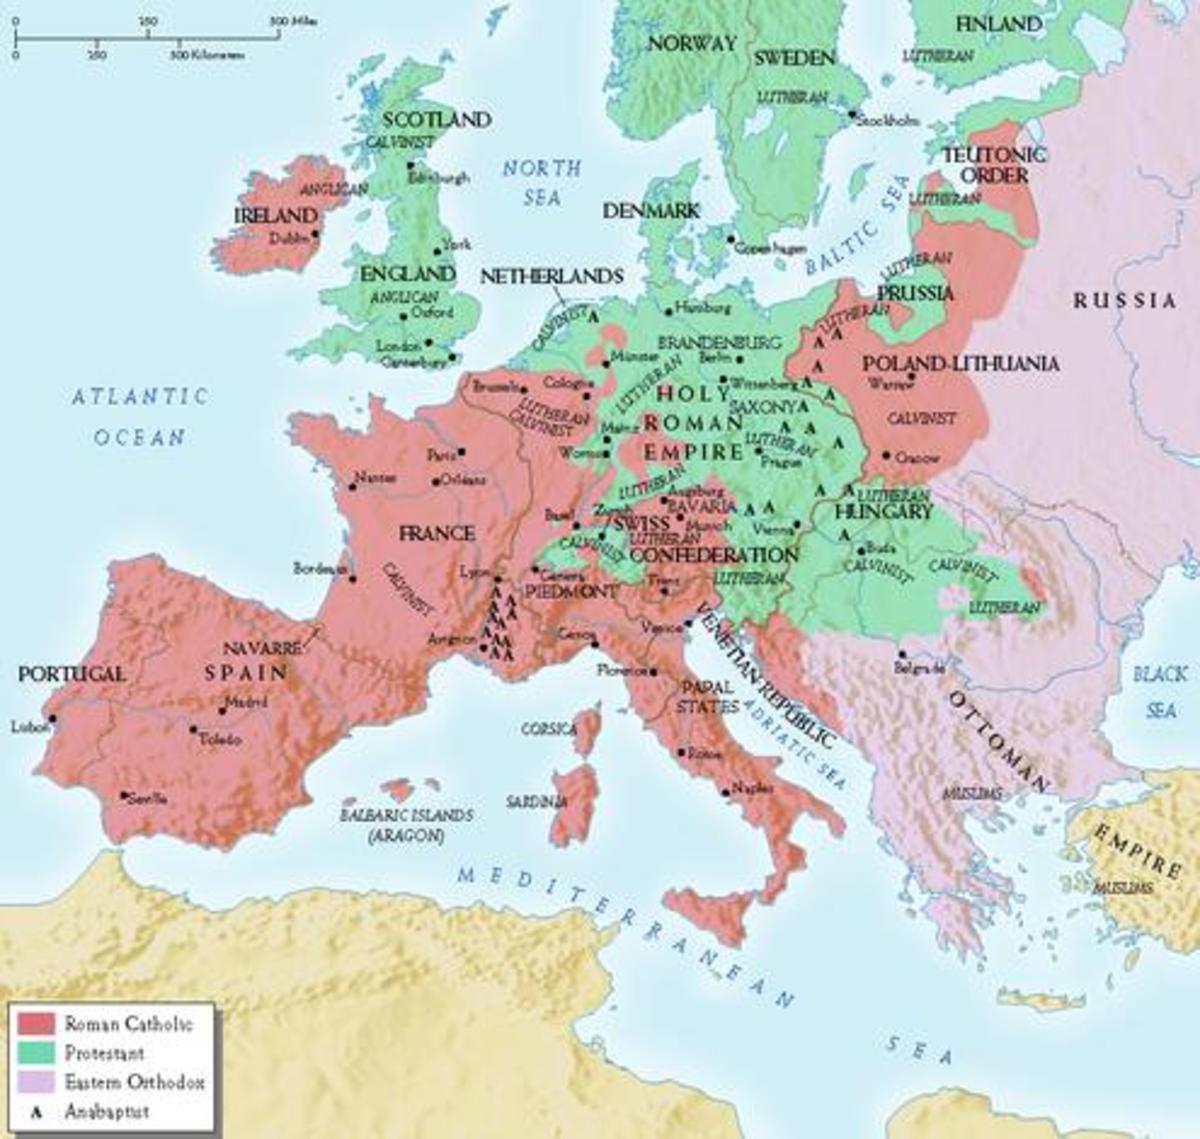 PROTESTANT AREAS OF EUROPE IN 1600